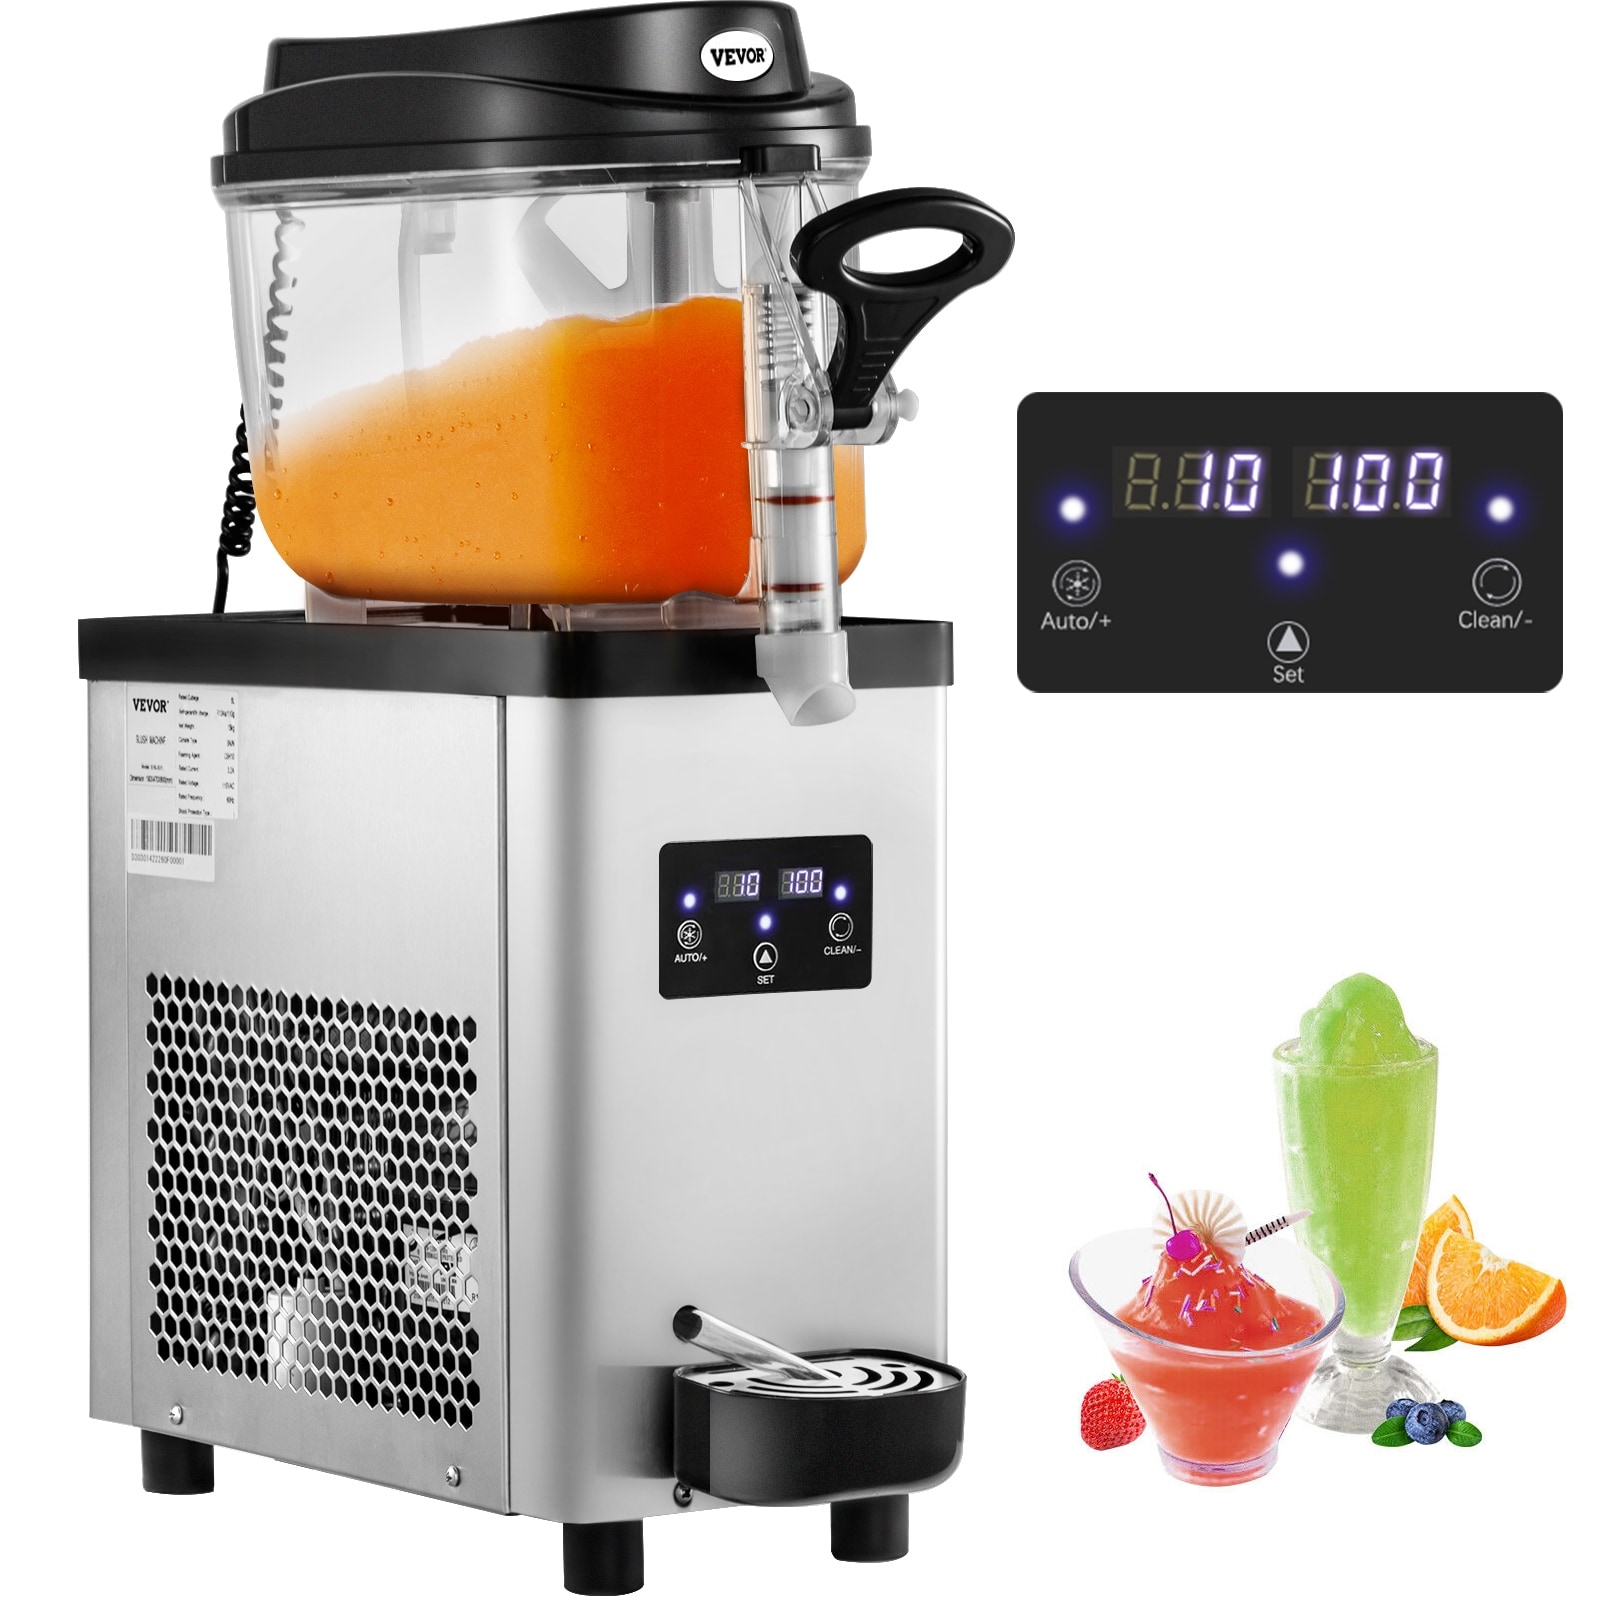 https://ak1.ostkcdn.com/images/products/is/images/direct/e558d4d9294cf2c4535acf14a2e4a5d6a3c4b46e/VEVOR-Commercial-Slushy-Machine-6L-1.6-Gallons-25-Cups-Single-Bowl-Stainless-Steel-Margarita-Smoothie-Frozen-Drink-Maker.jpg